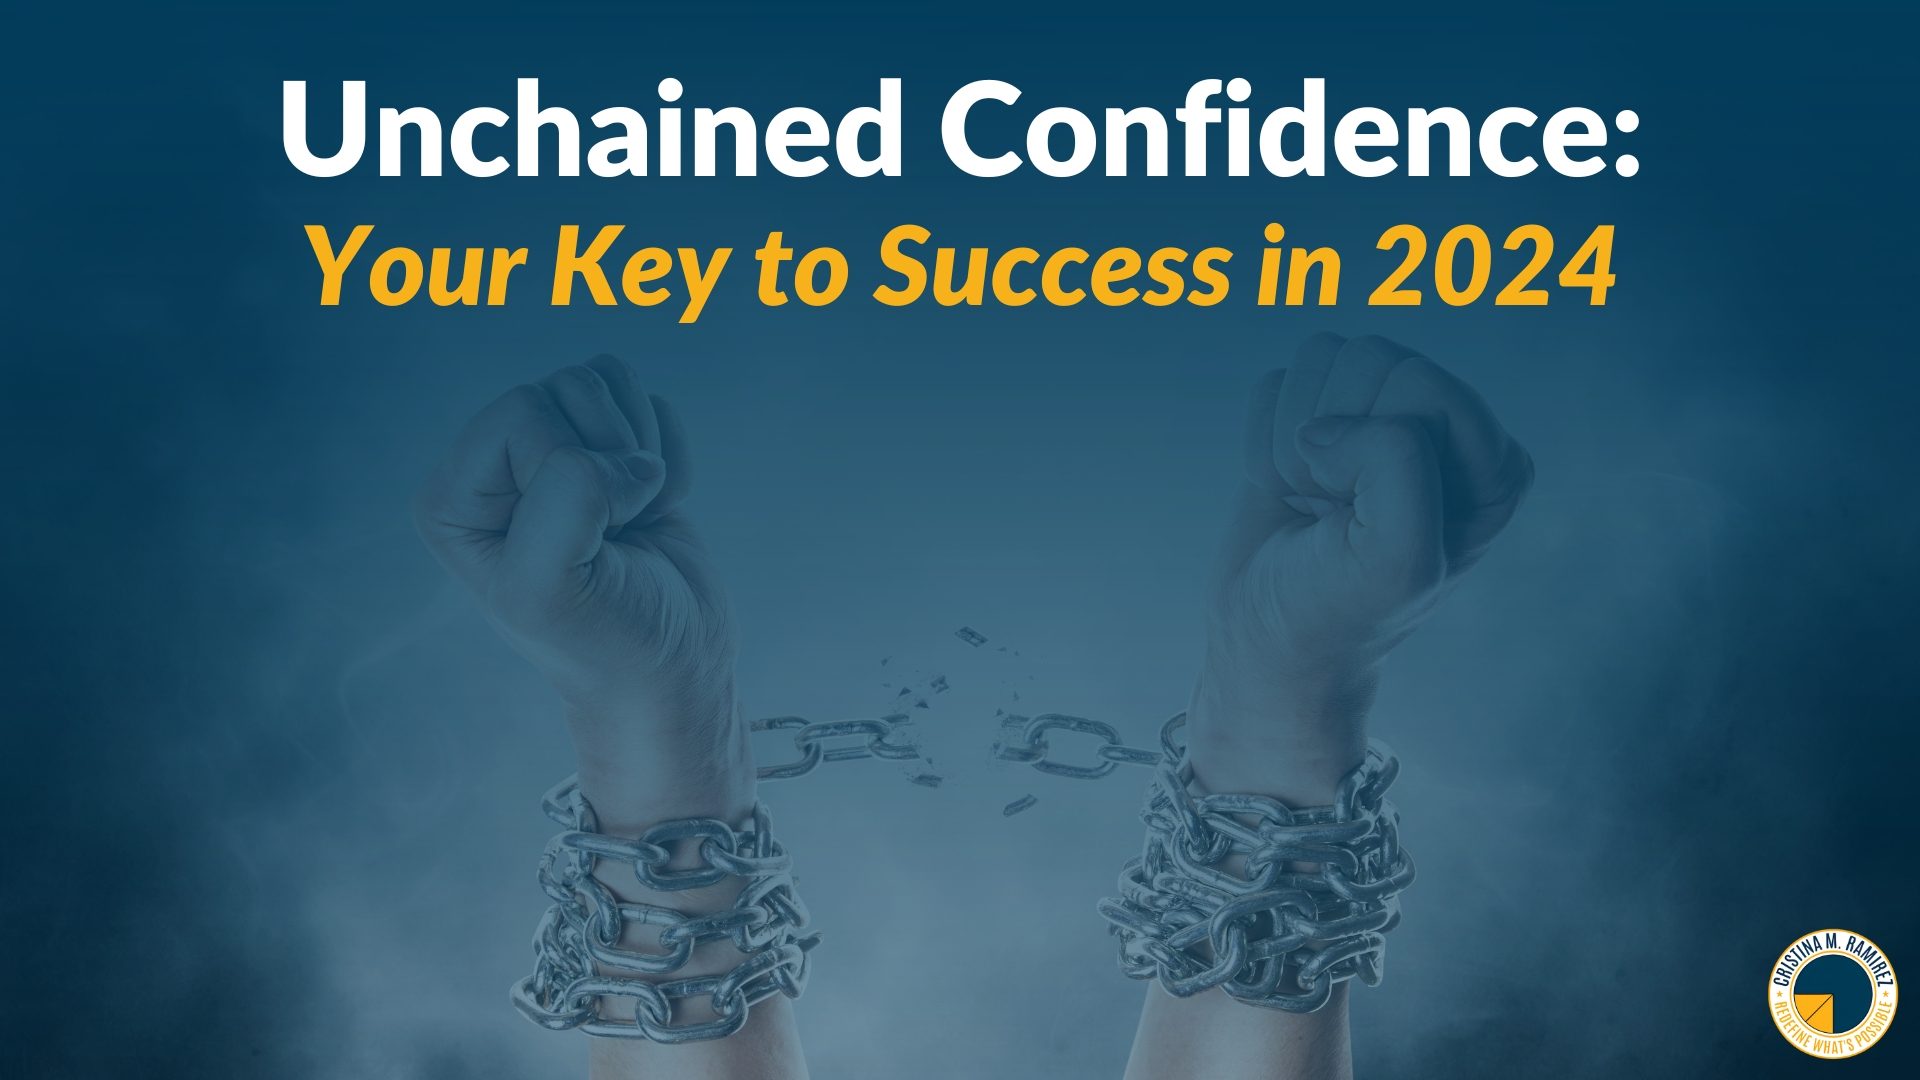 Unchained Confidence - Your Key to Success in 2024